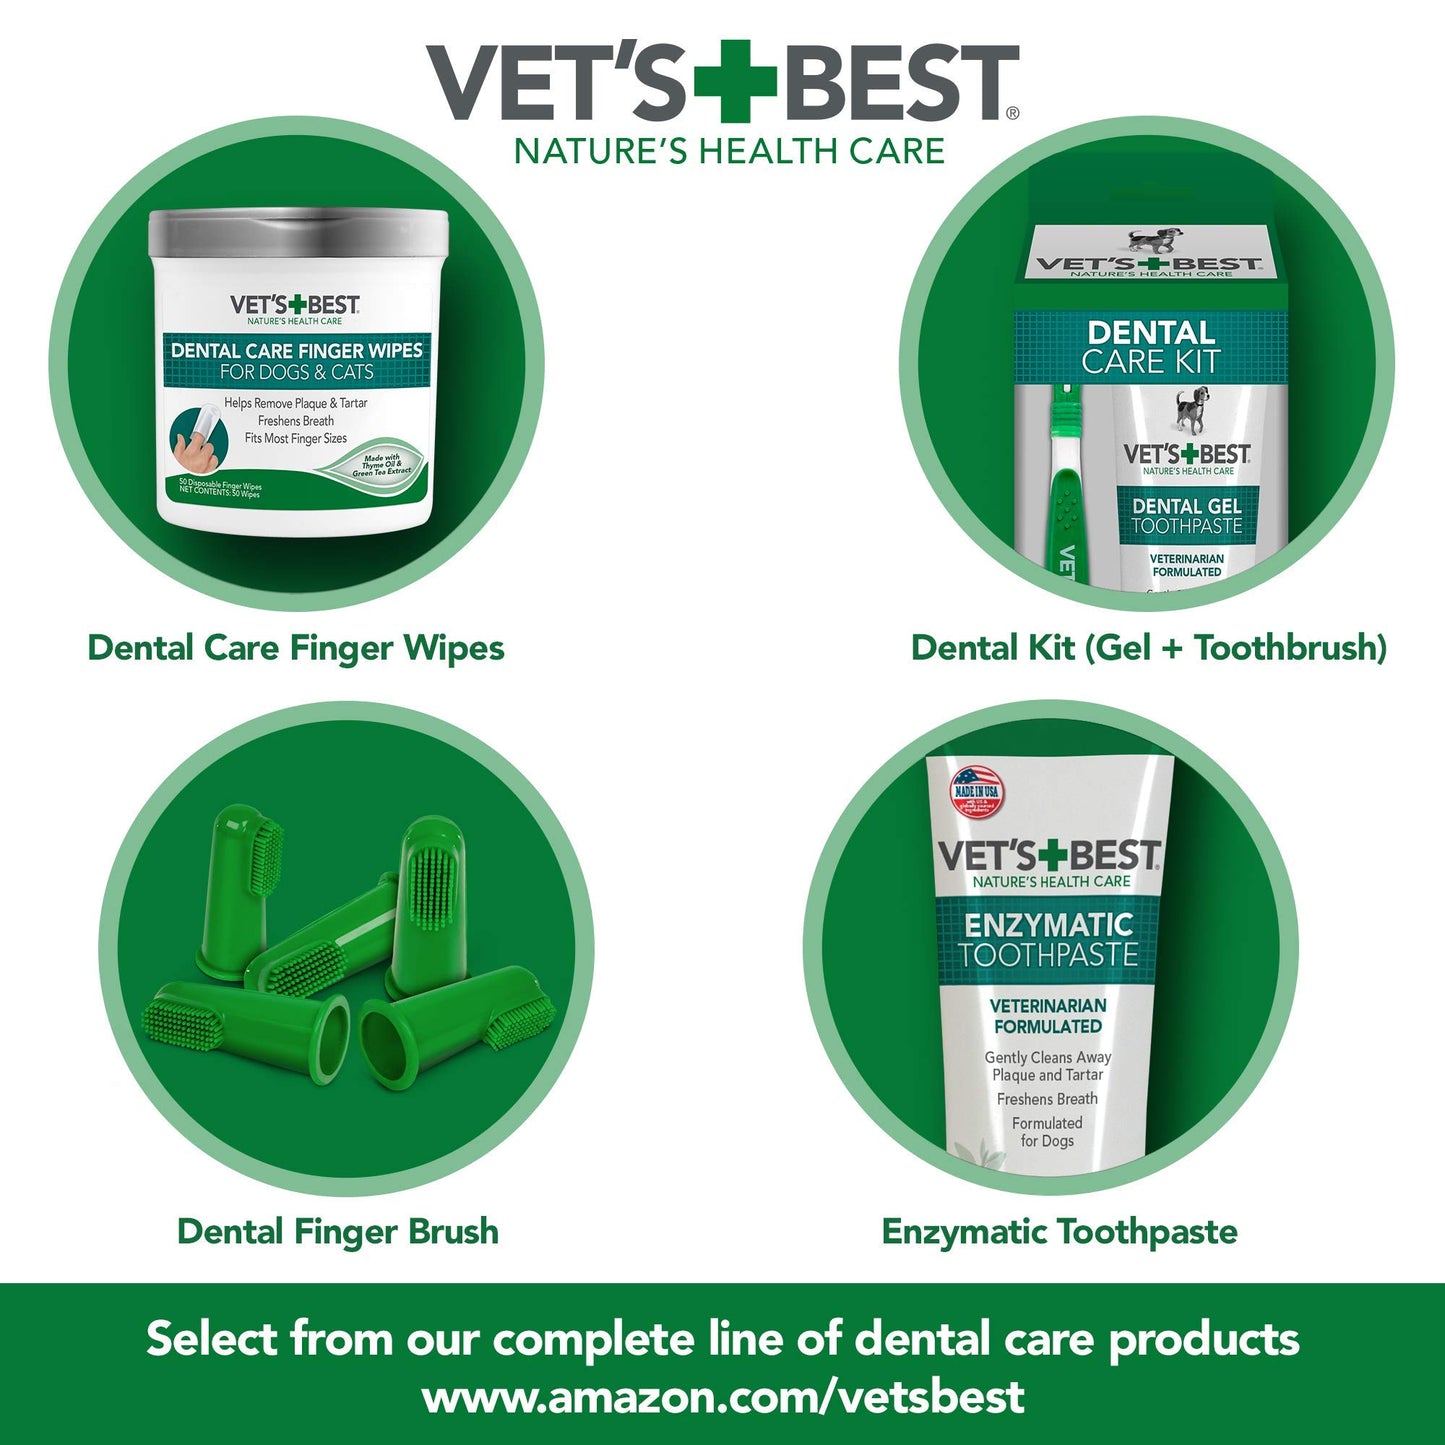 Vet's Best Dental Care Finger Wipes - Reduces Plaque & Freshens Breath - Teeth Cleaning Finger Wipes for Dogs & Cats - 50 Count